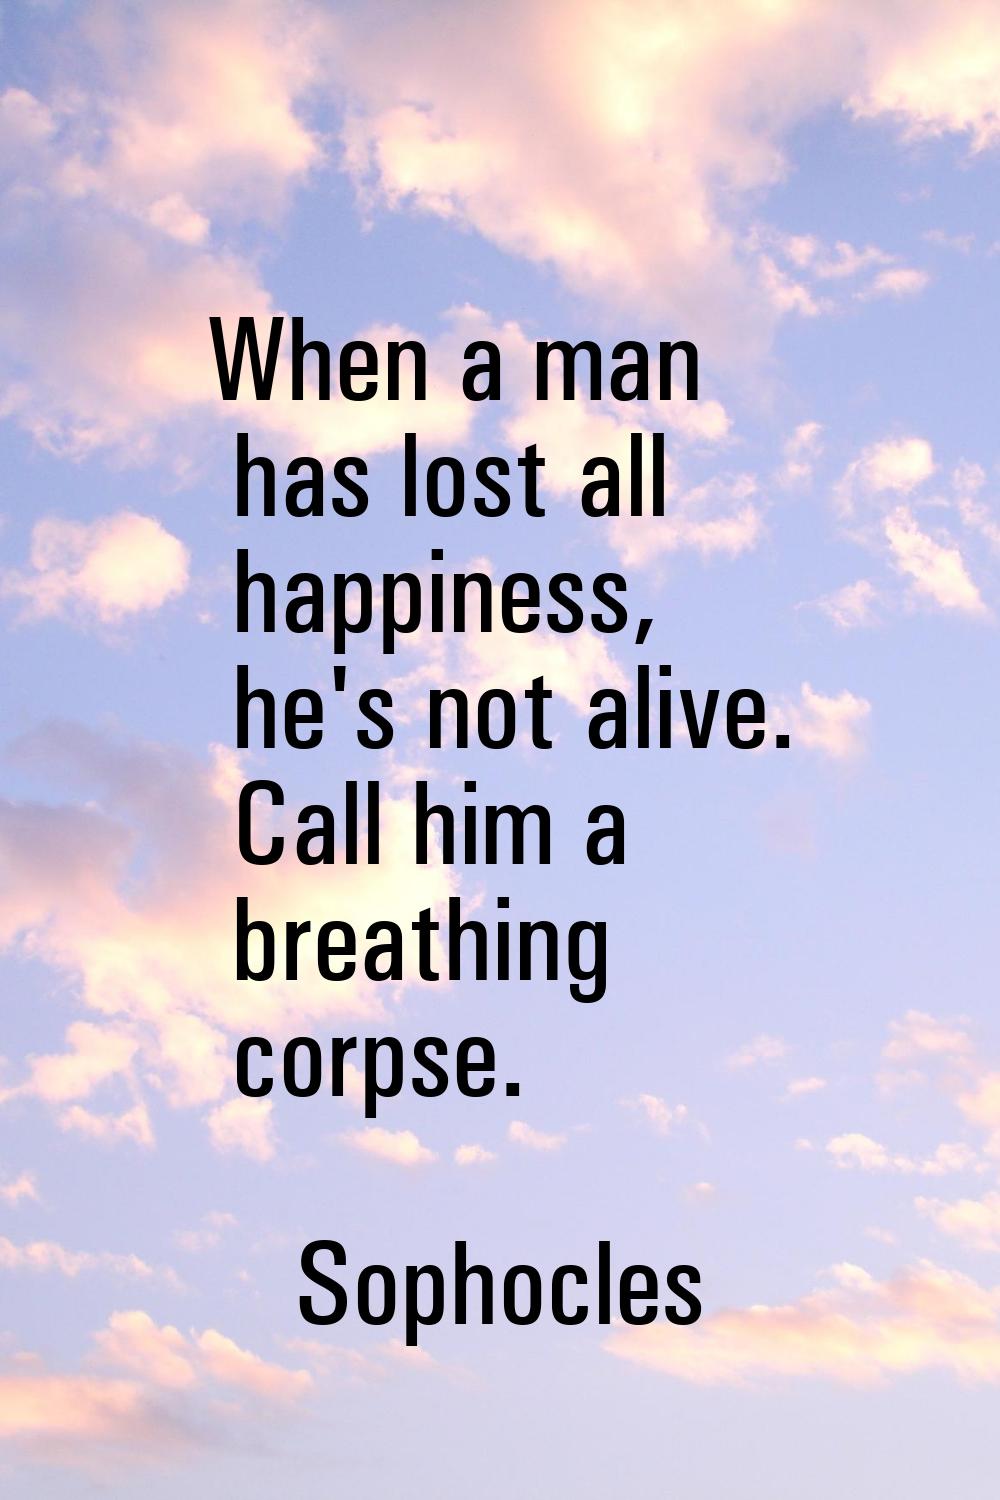 When a man has lost all happiness, he's not alive. Call him a breathing corpse.